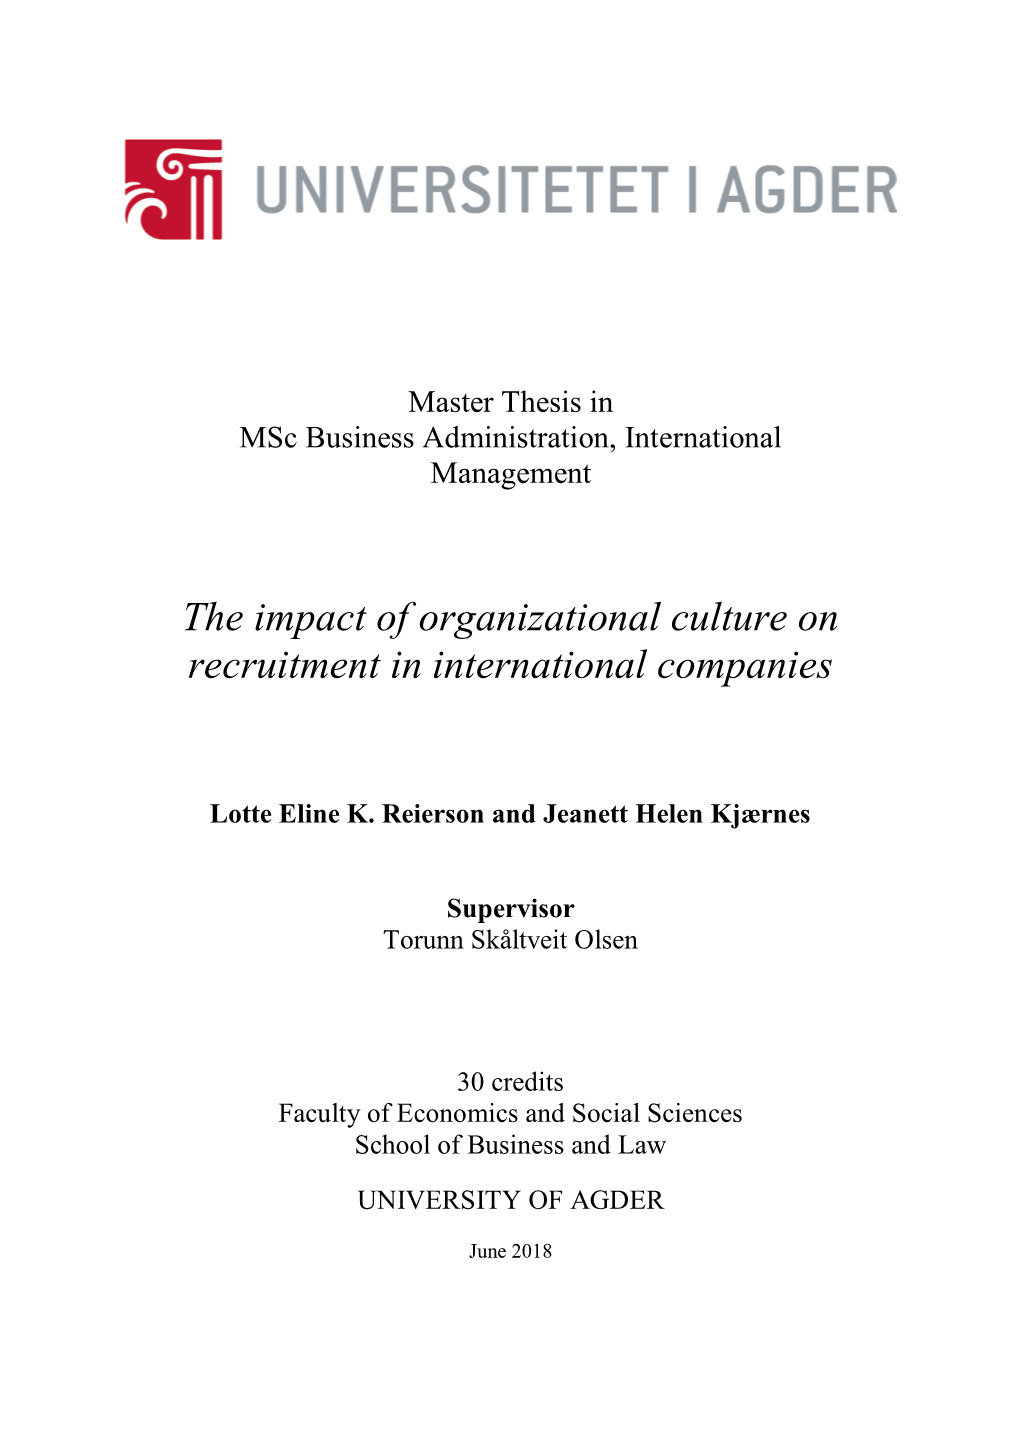 The Impact of Organizational Culture on Recruitment in International Companies